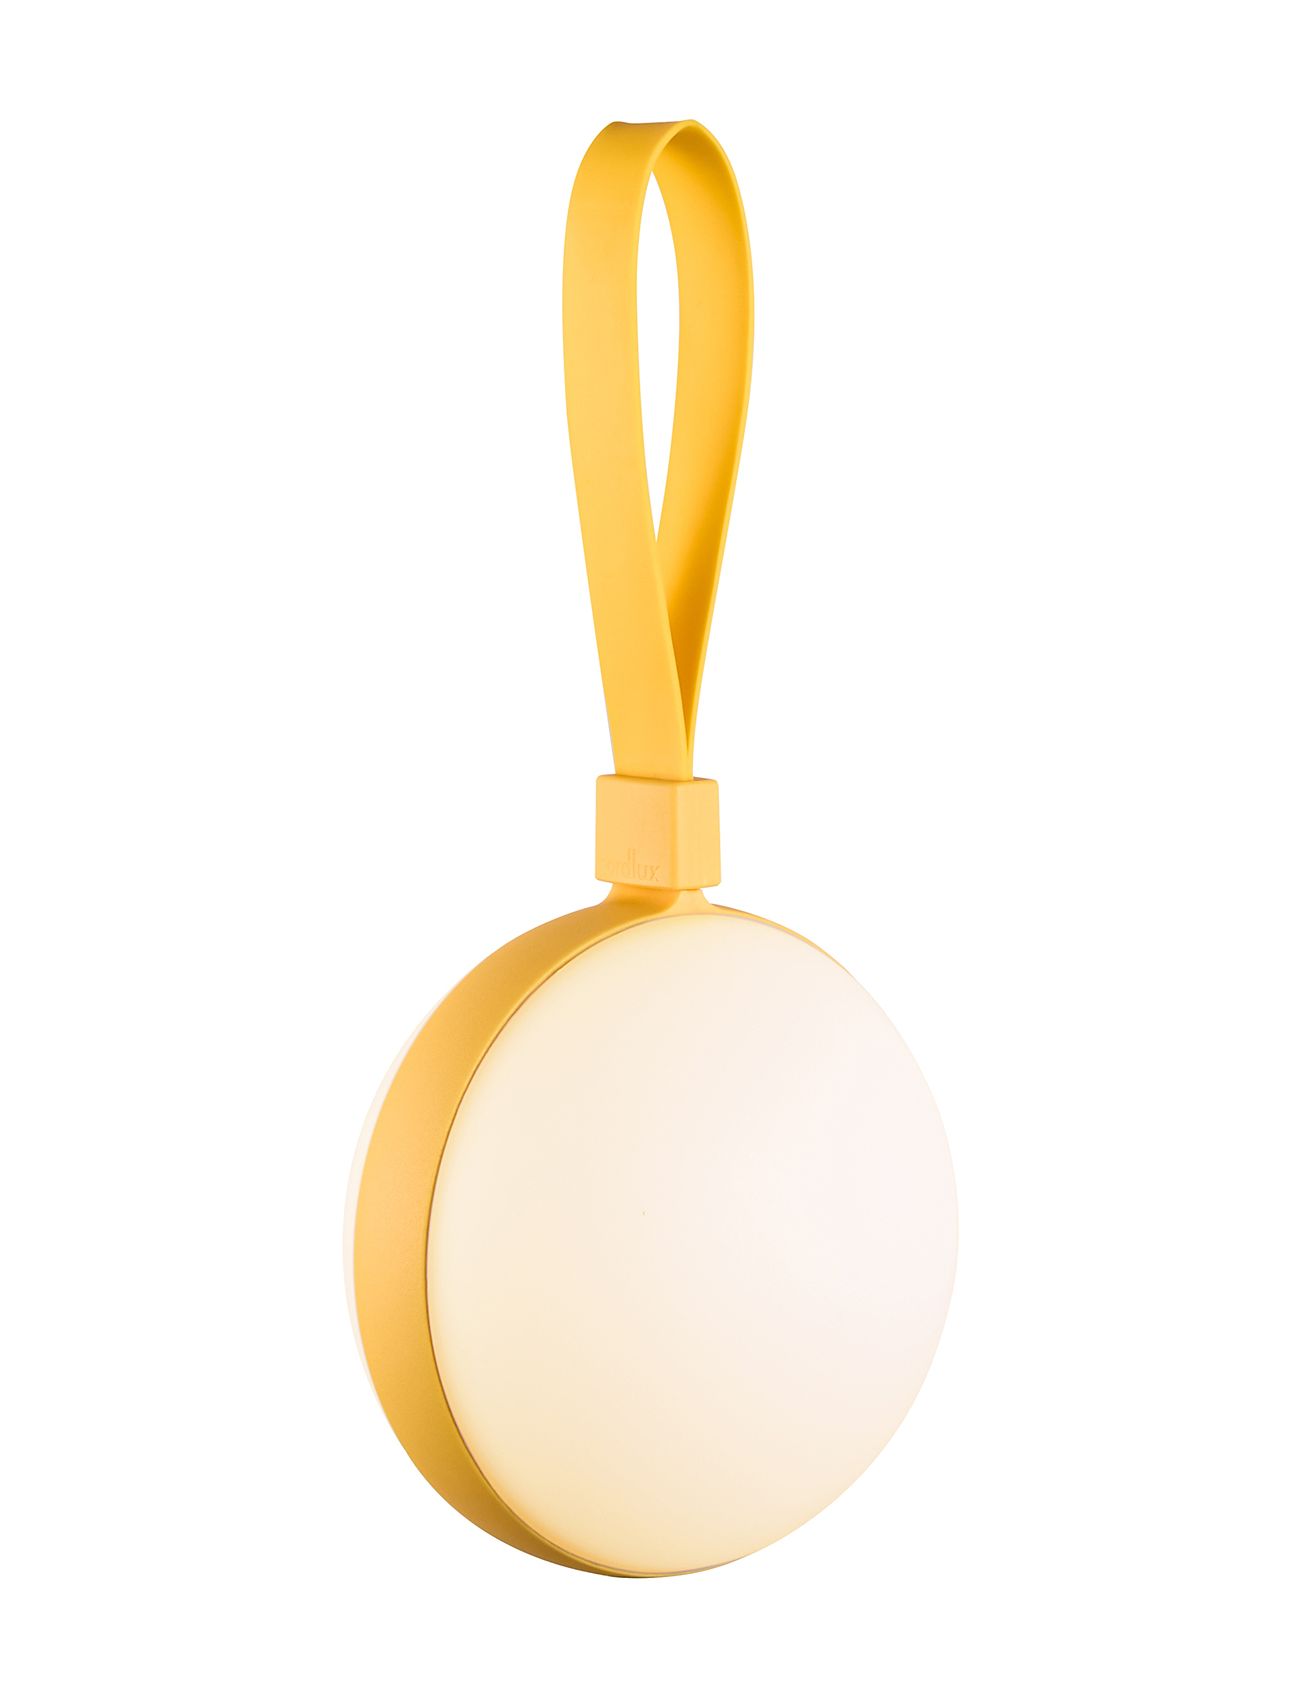 Bring To-Go 12 | Batterilampe Home Lighting Lamps Ceiling Lamps Pendant Lamps Yellow Nordlux